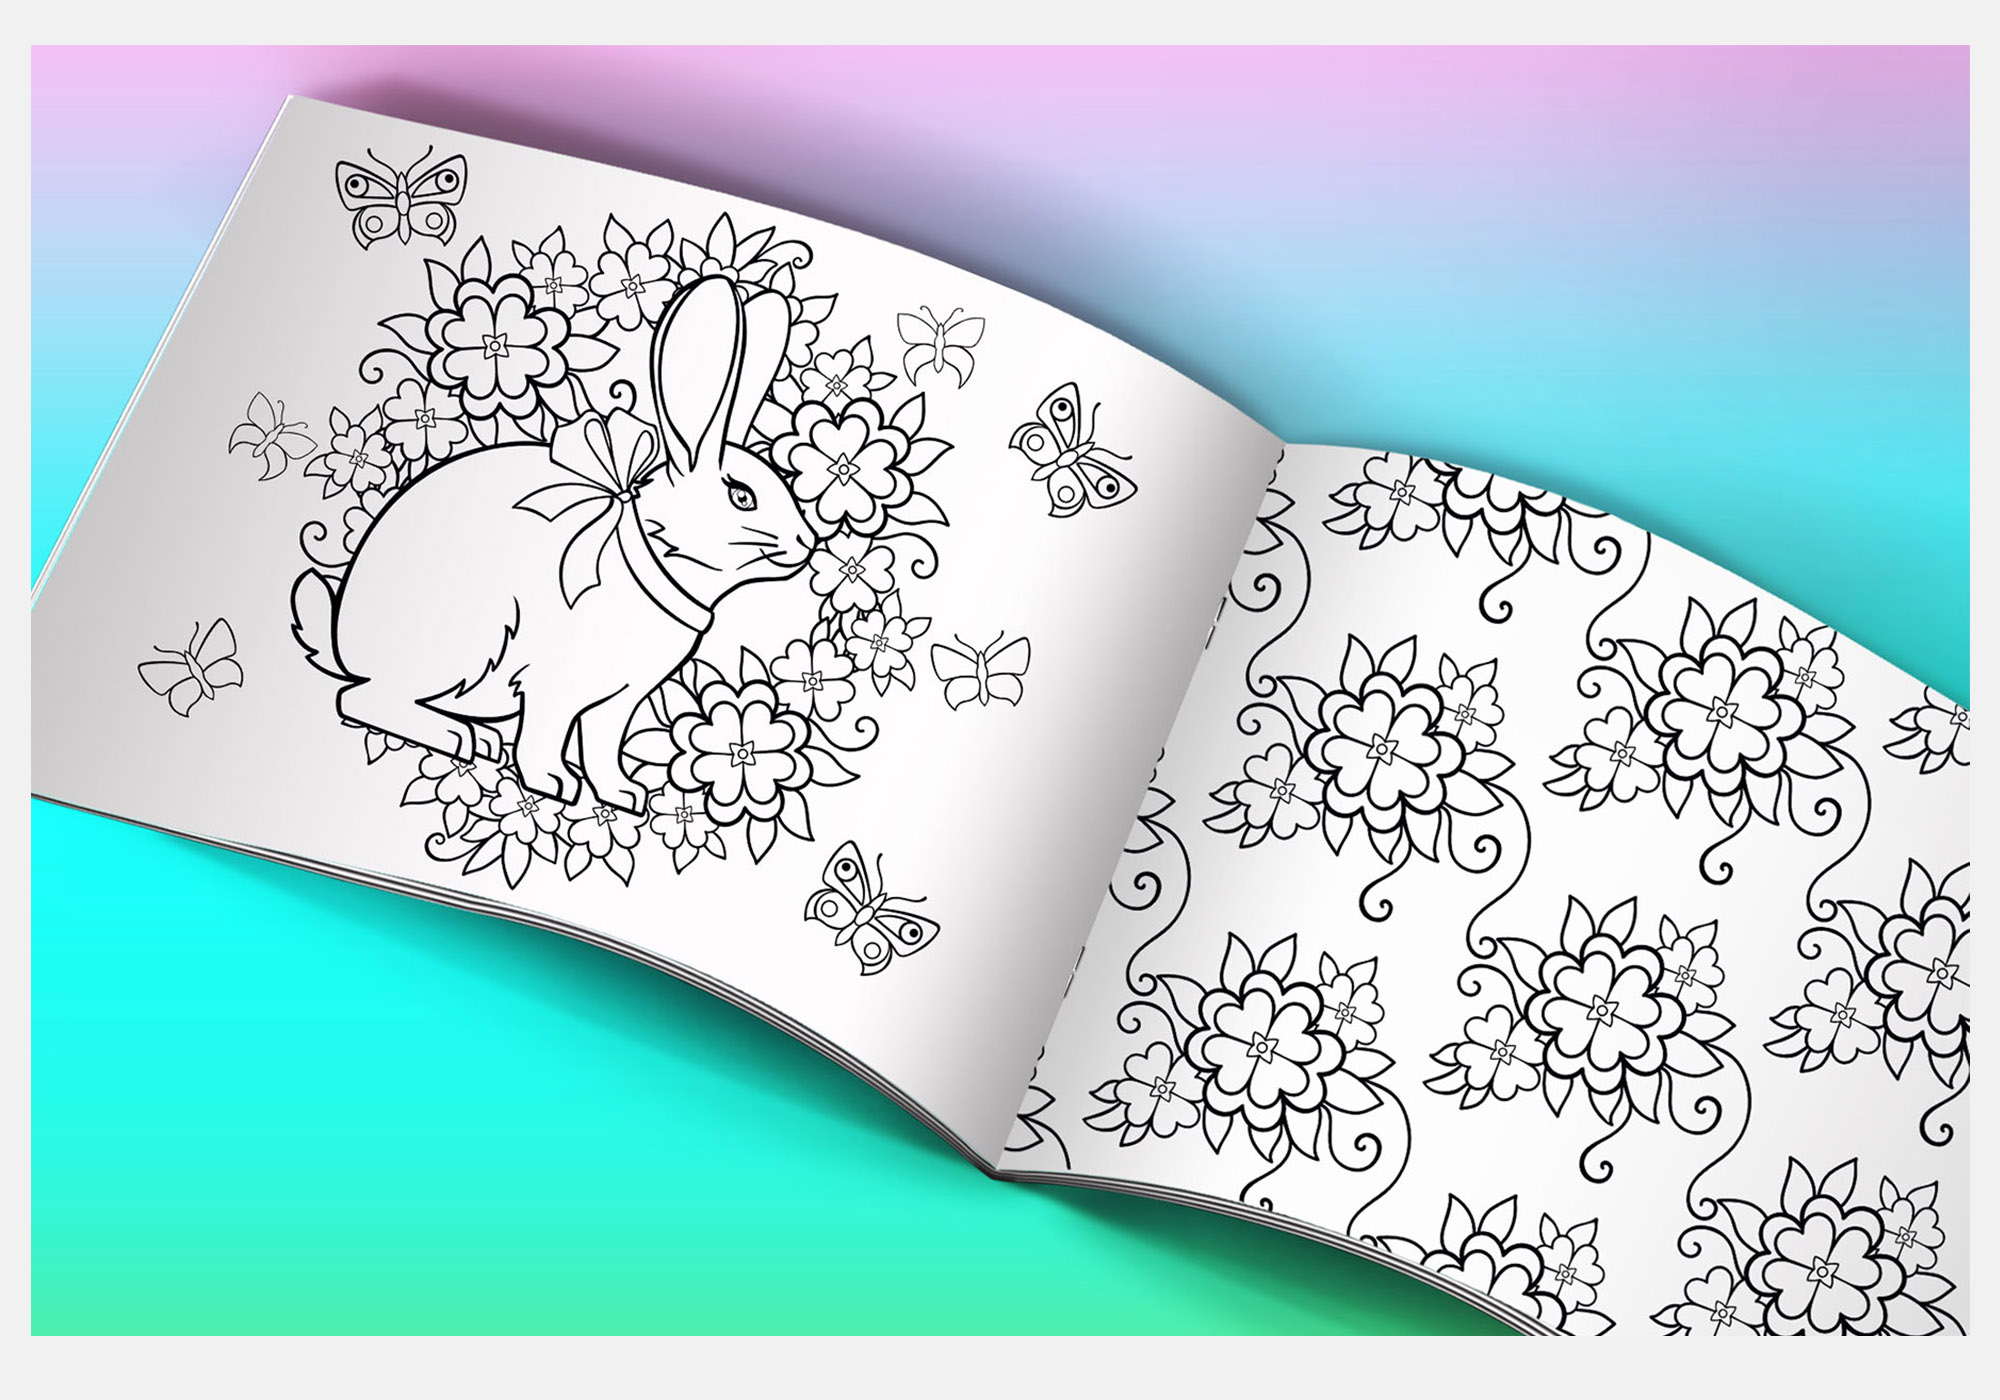 Coloring book with an image of a bunny and flowers.